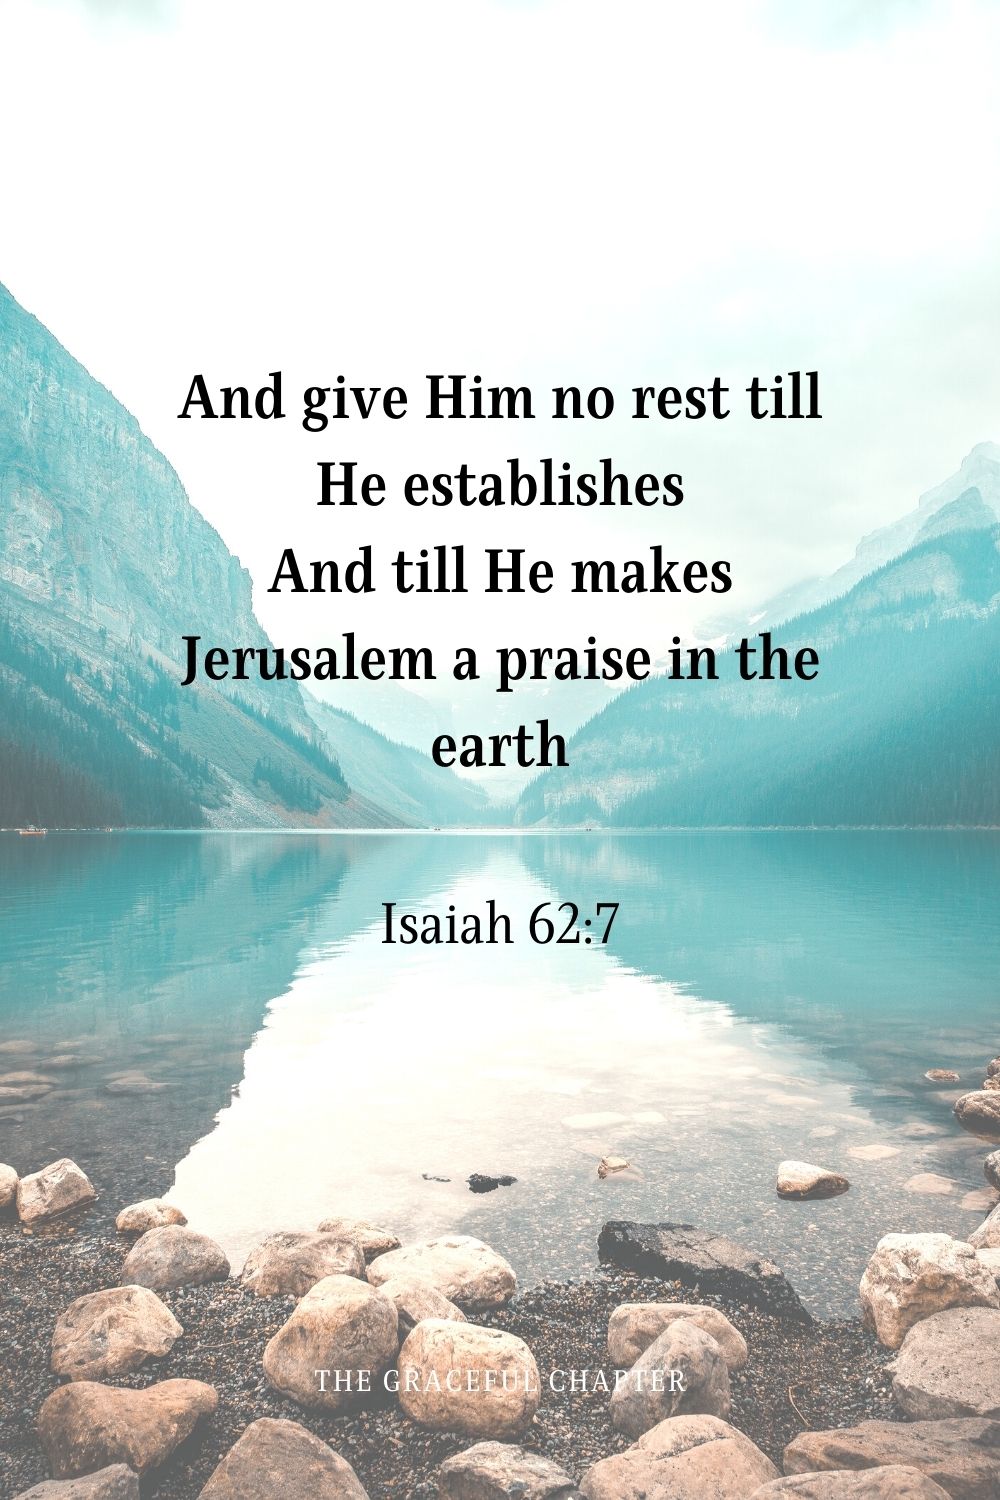 And give Him no rest till He establishes And till He makes Jerusalem a praise in the earth.